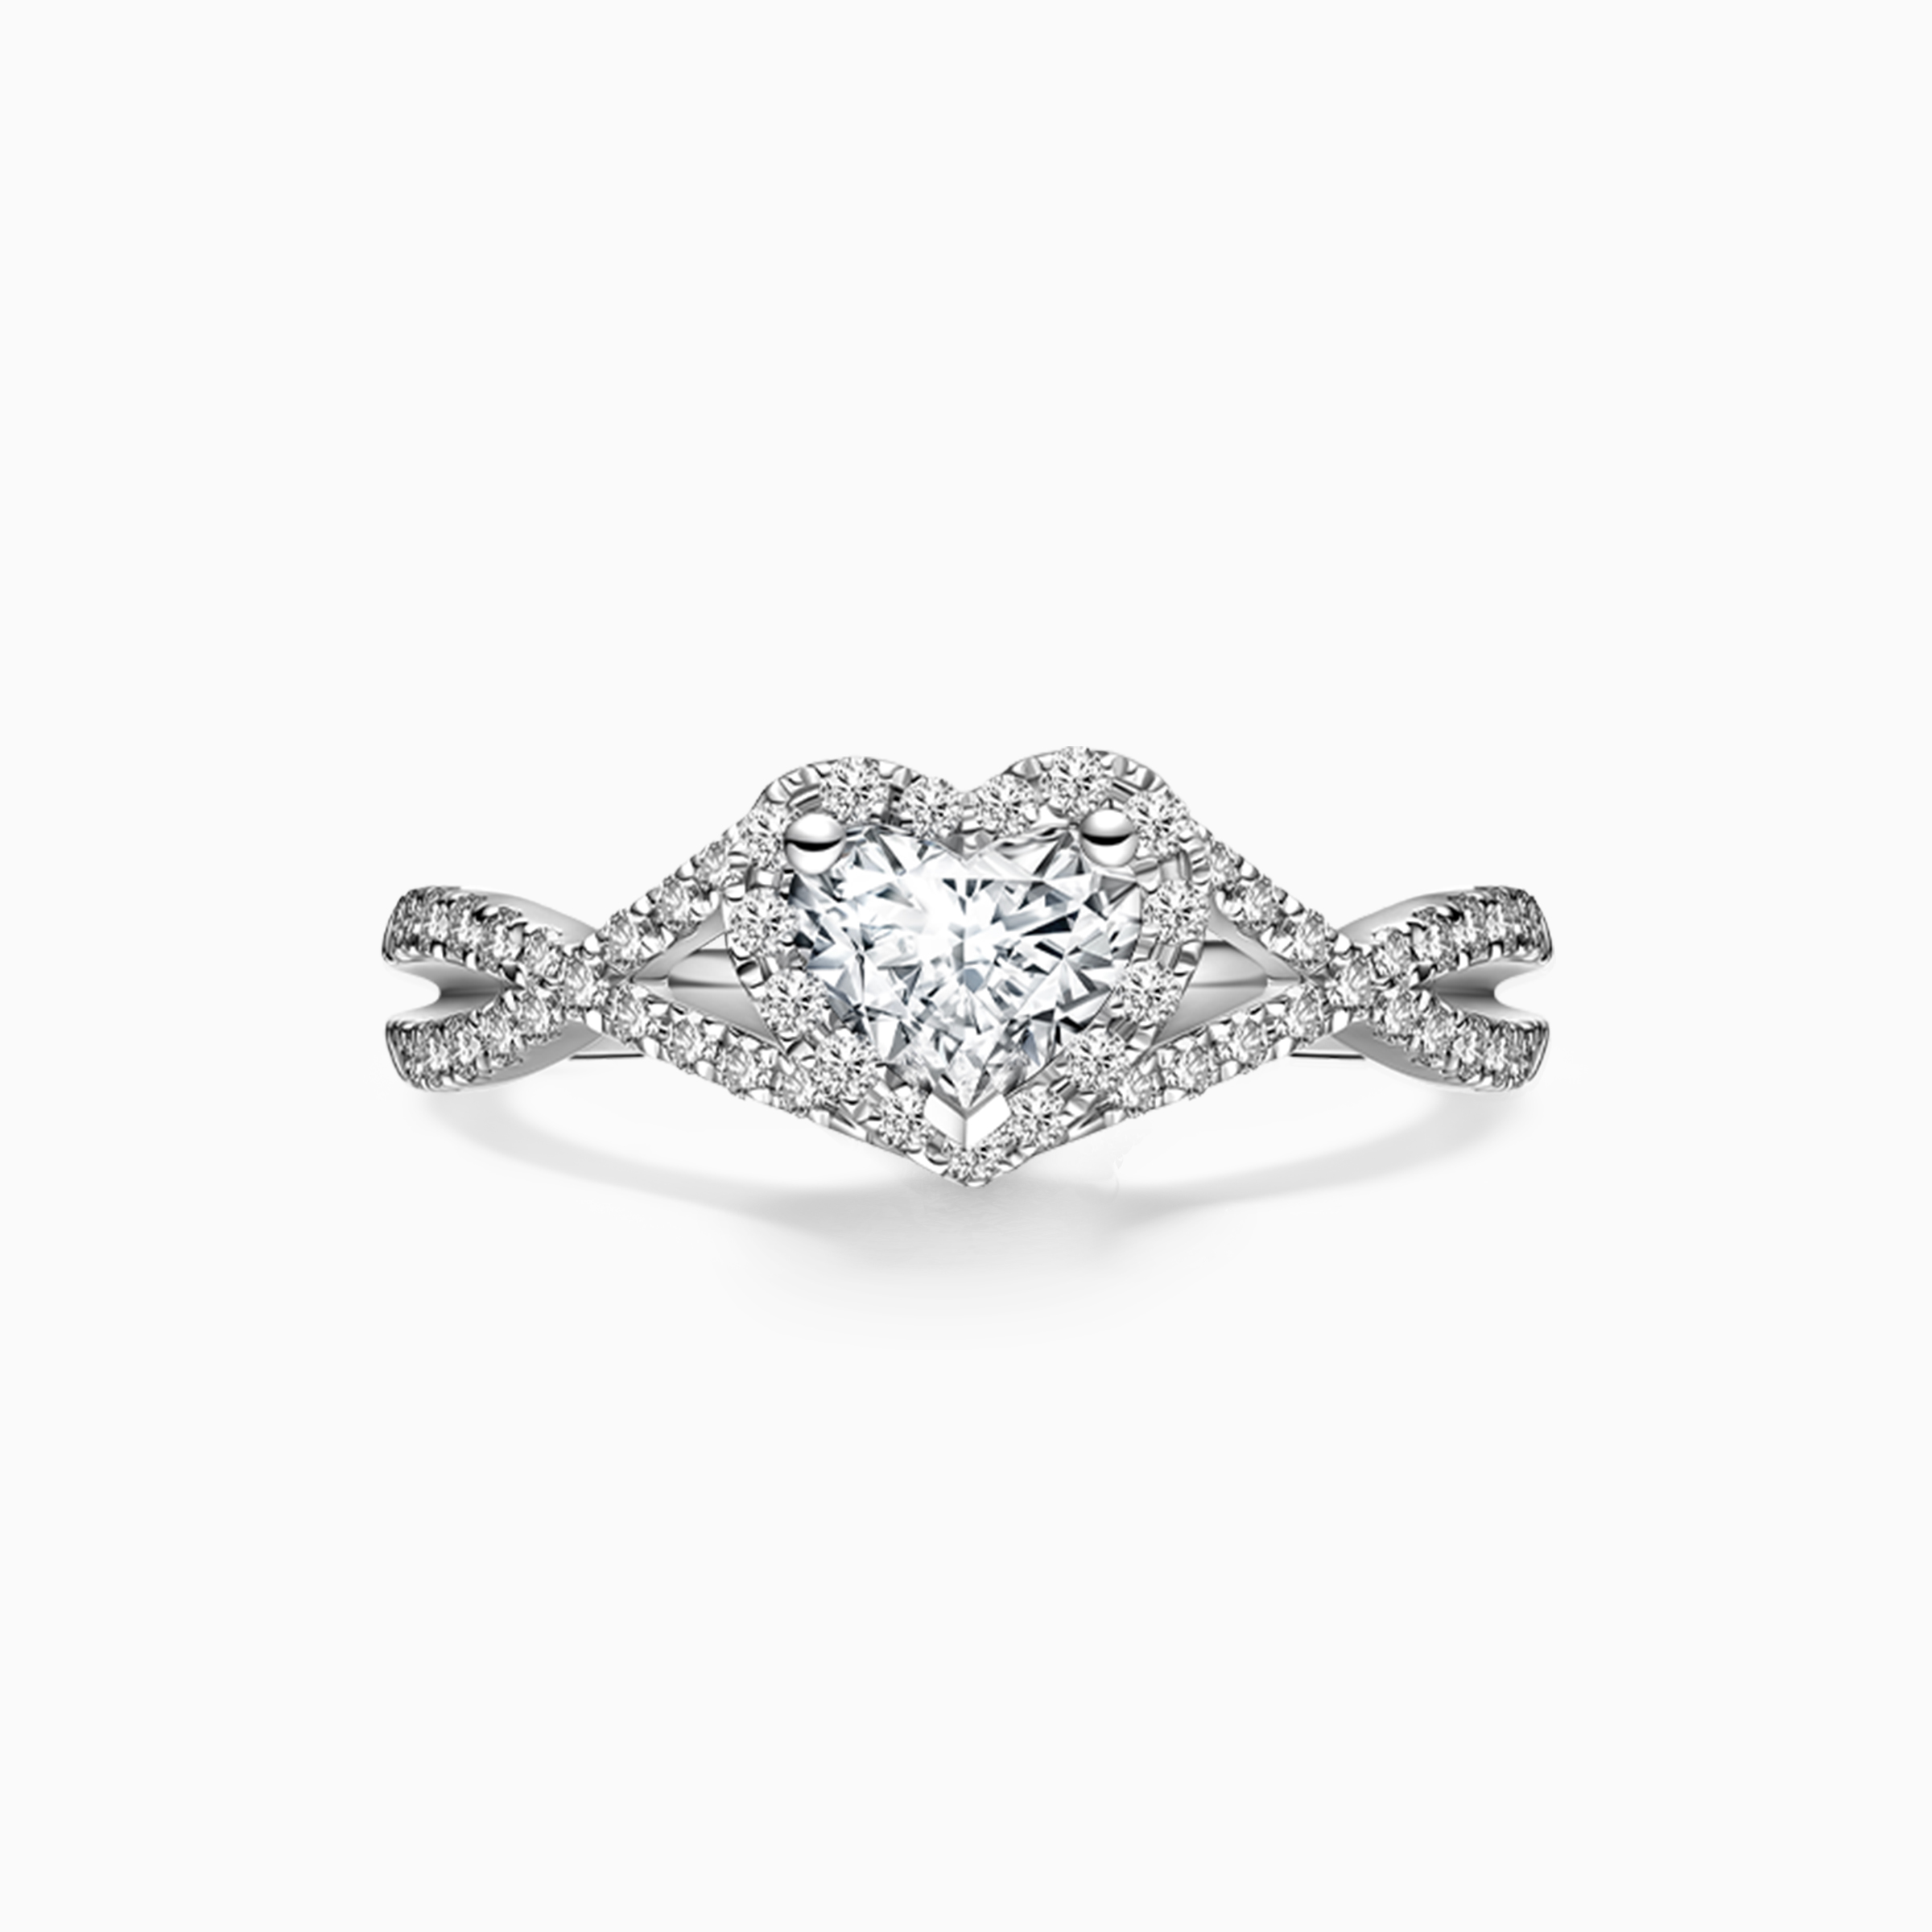 Darry Ring halo diamond engagement ring front view